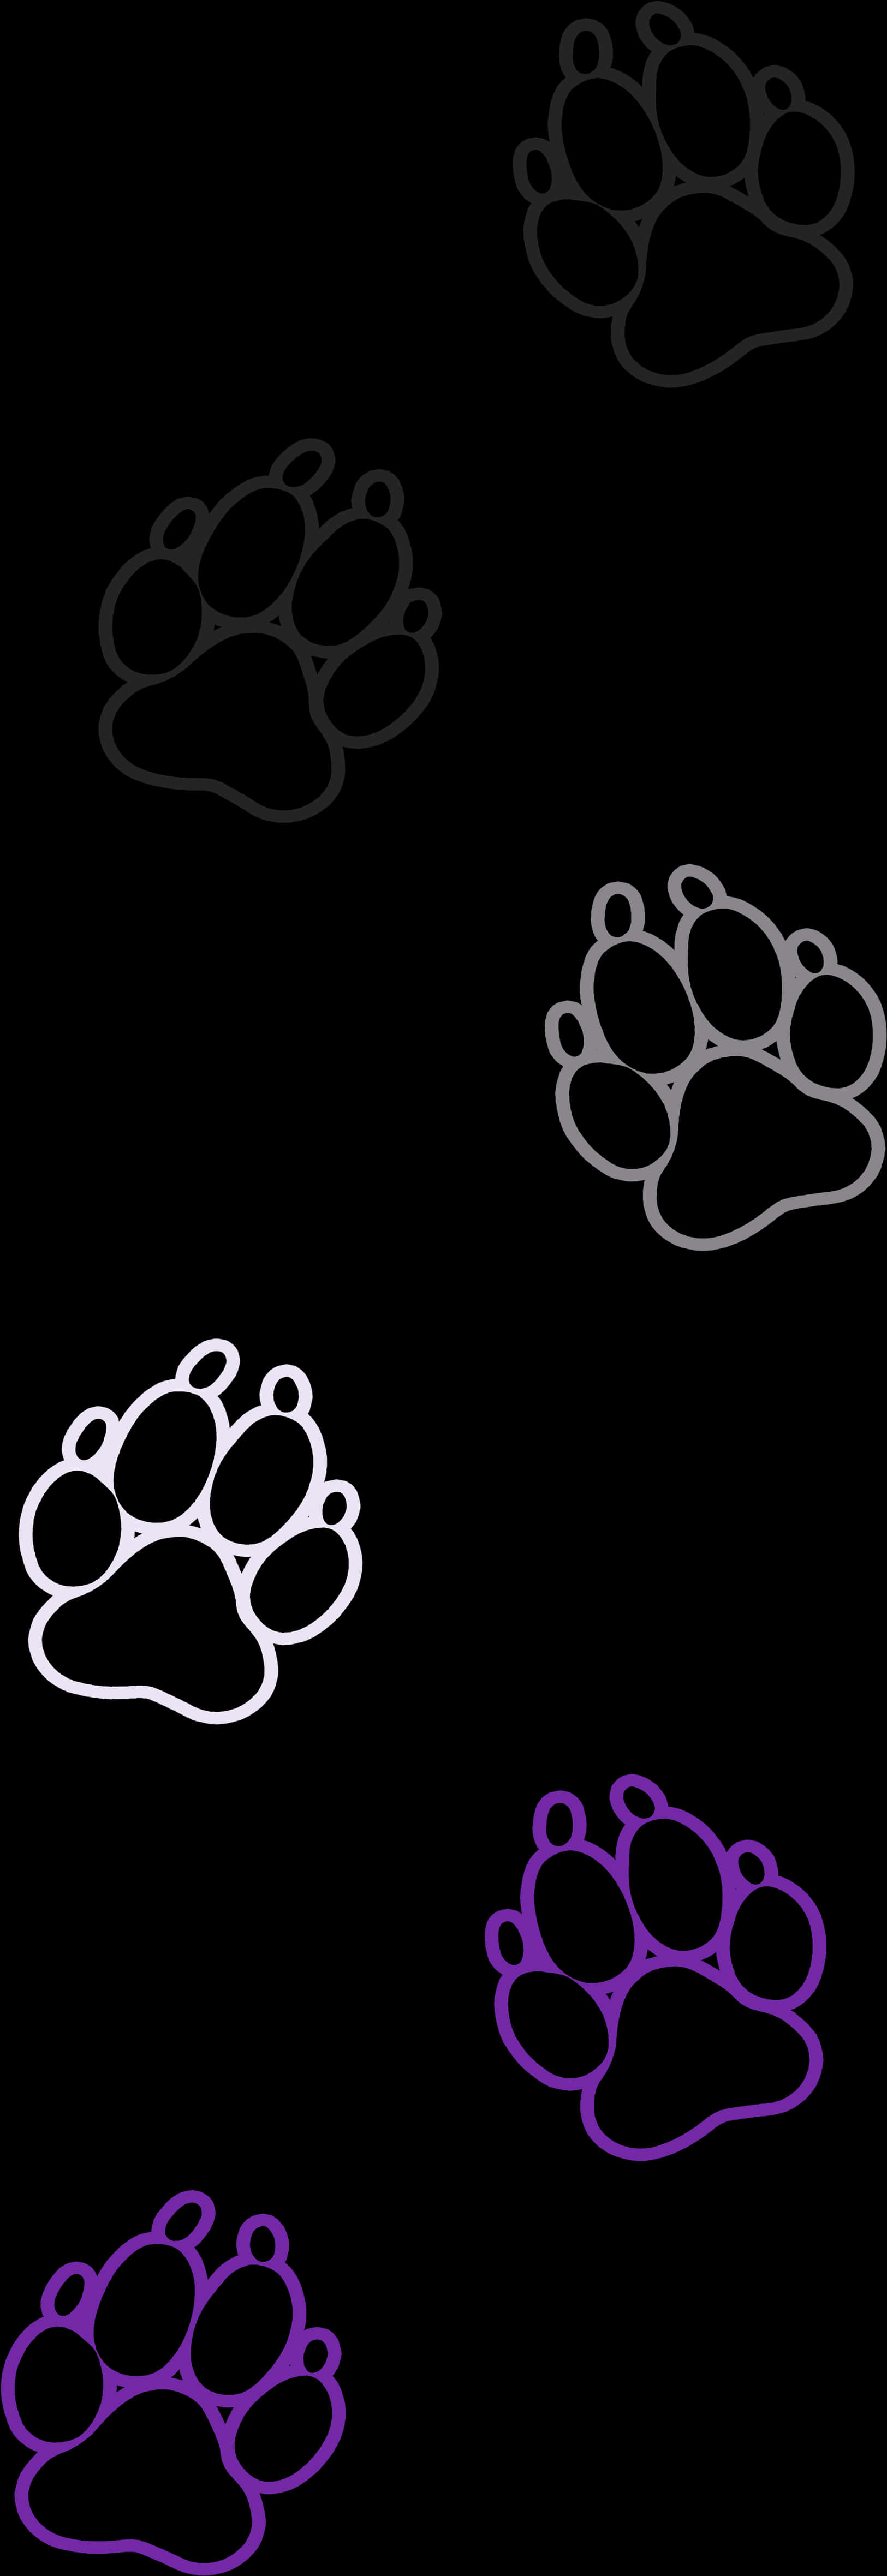 A Pair Of Paw Prints On A Black Background